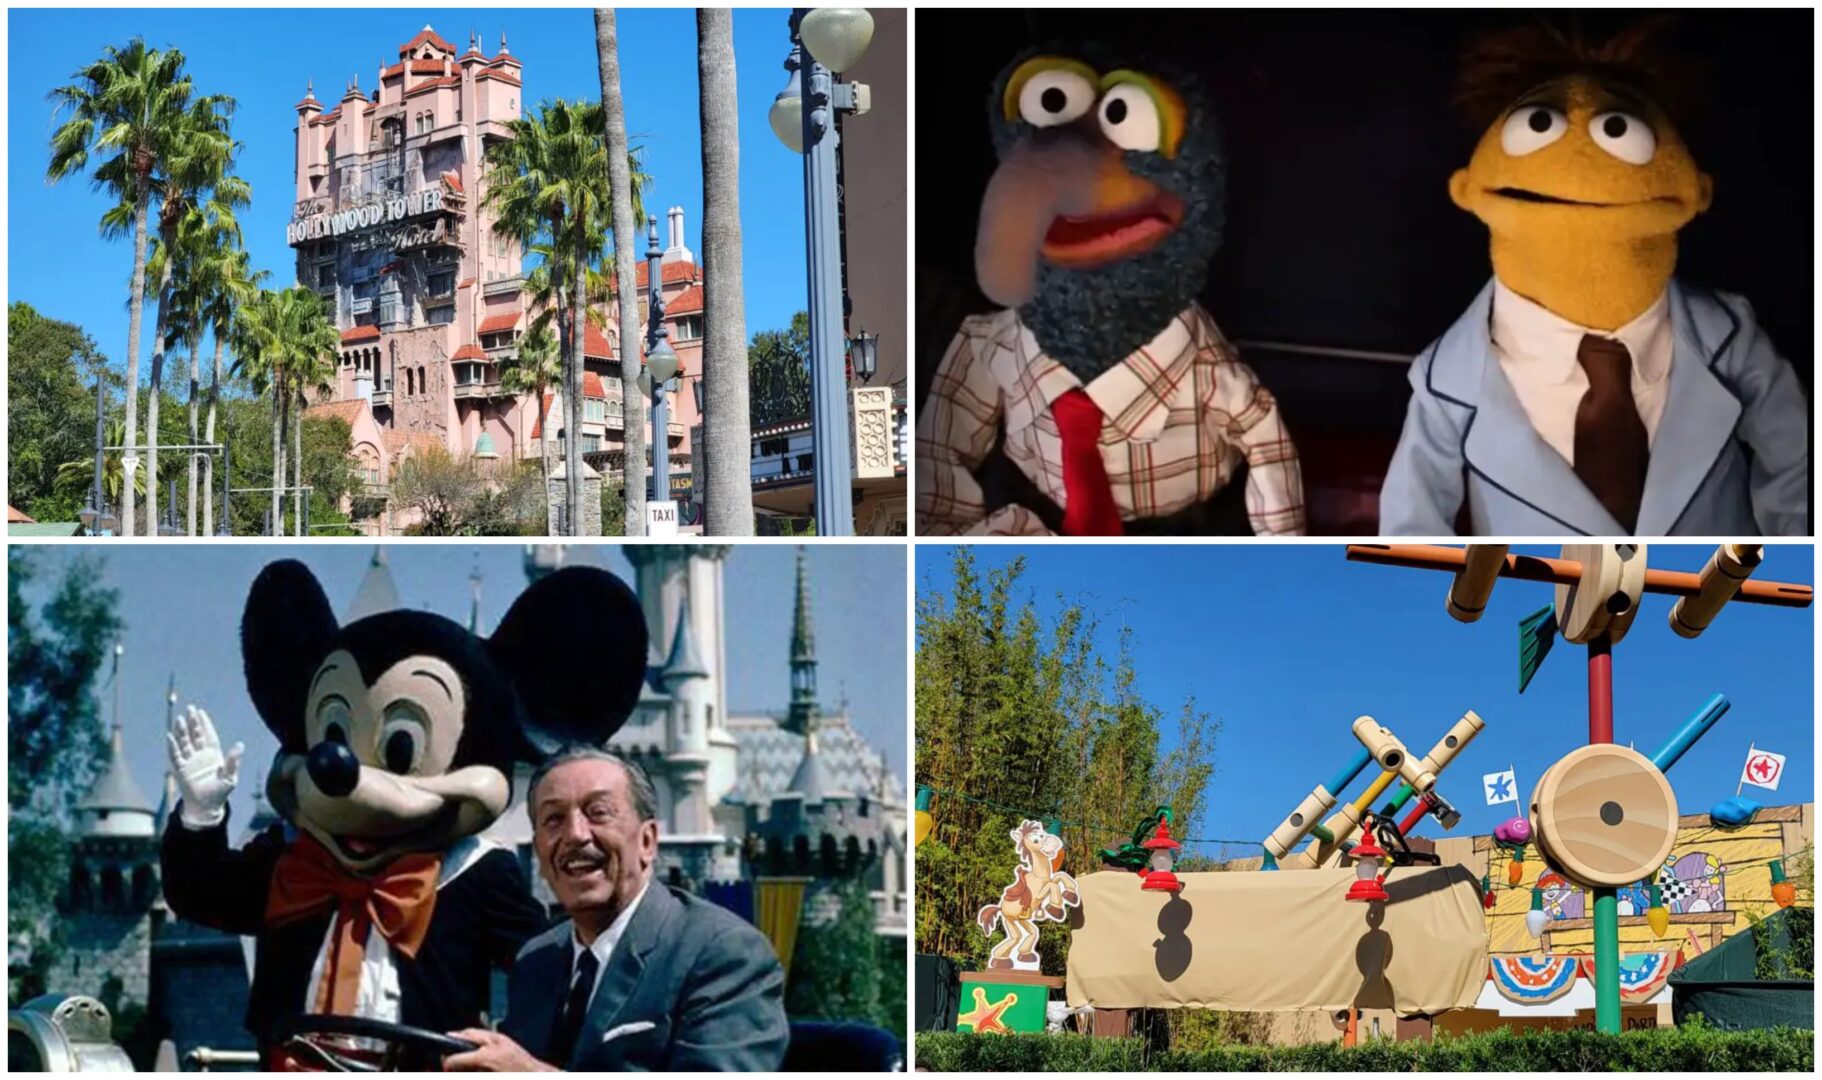 Disney News Round-Up: Muppets Ride with Figment, Tower of Terror Wait Times Cut in Half, Roundup Rodeo BBQ Construction, Disney’s Live-Action The Little Mermaid Teaser